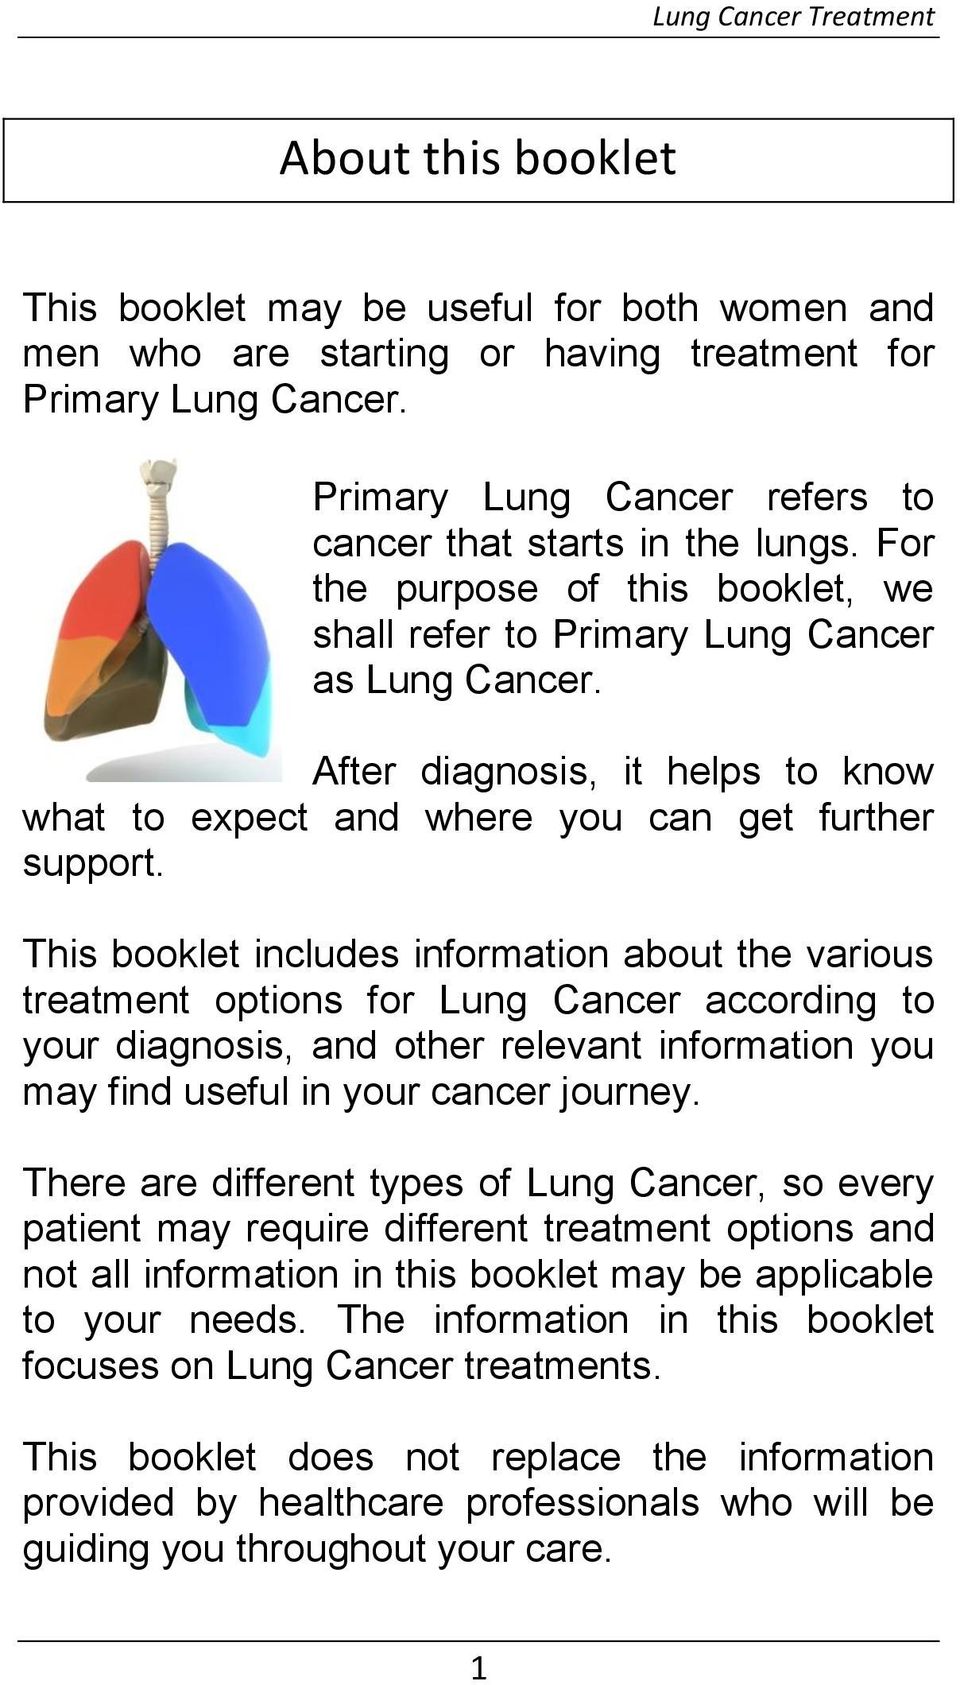 This booklet includes information about the various treatment options for Lung Cancer according to your diagnosis, and other relevant information you may find useful in your cancer journey.